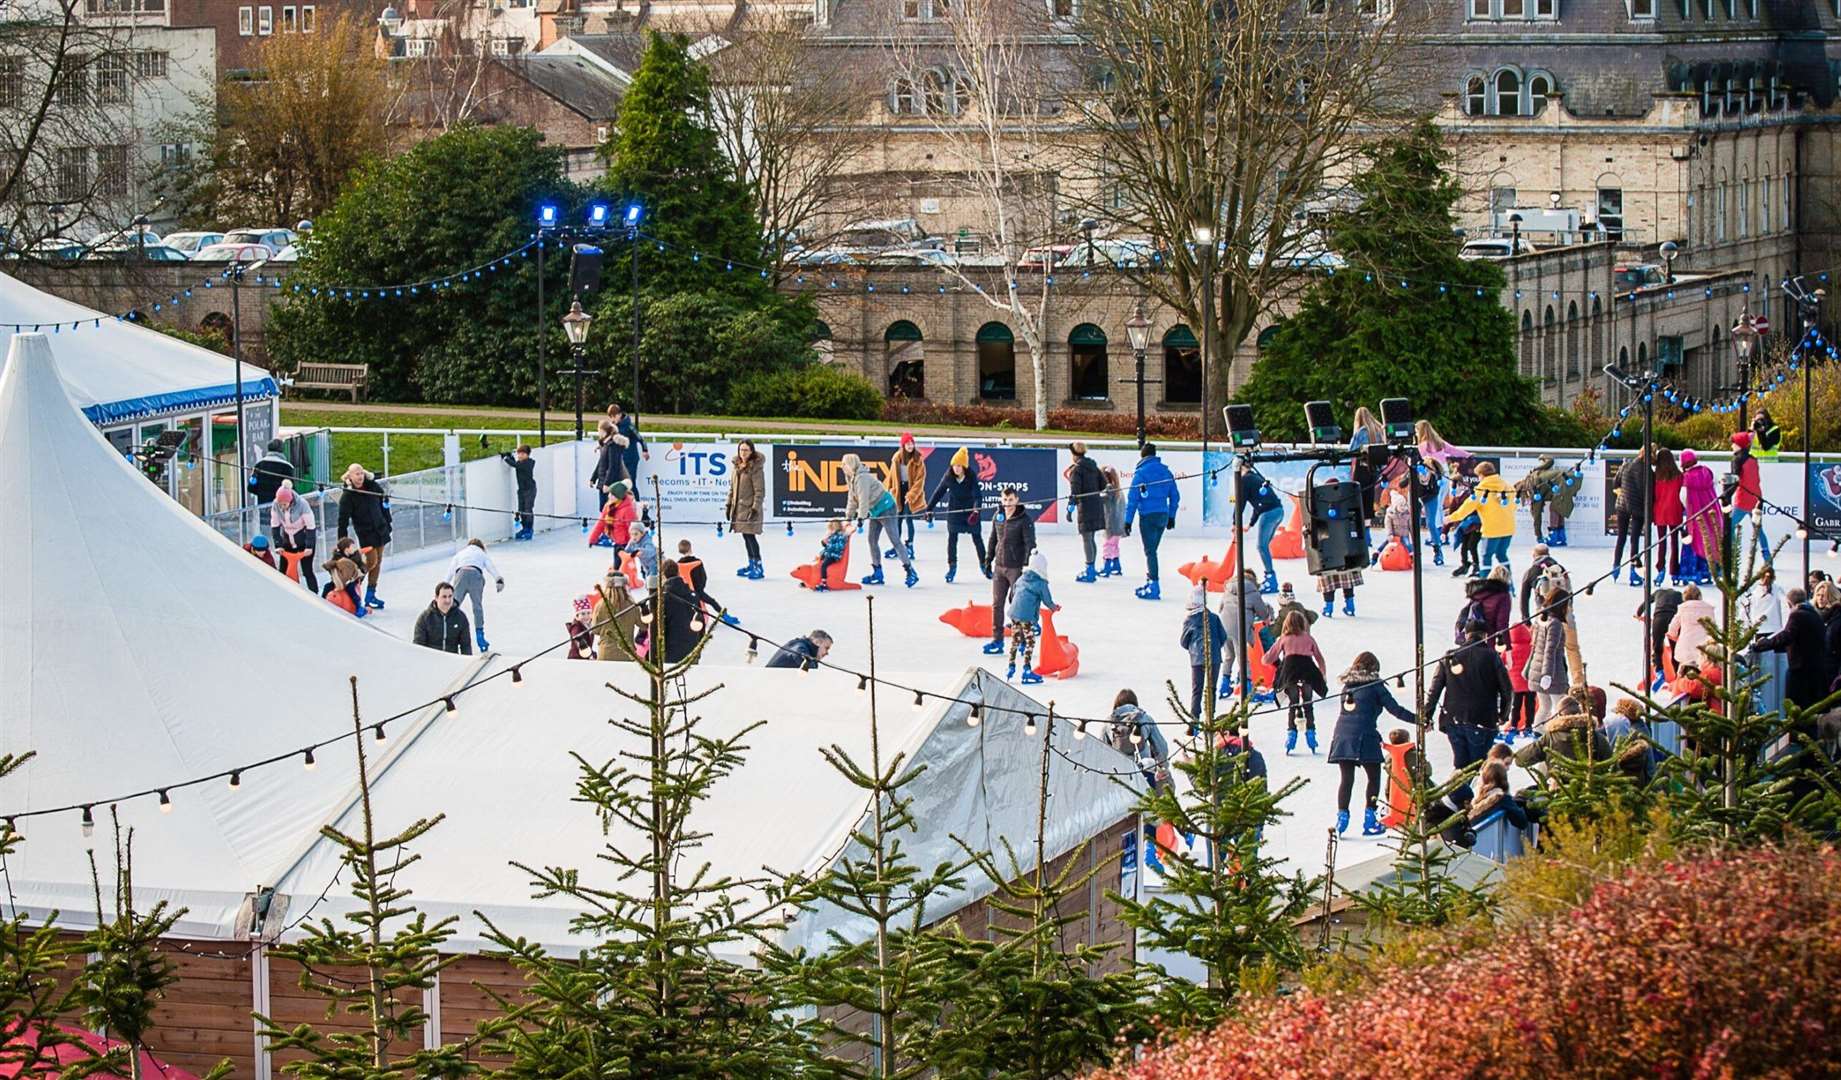 Have a go on the skating rink or browse the Christmas market in Tunbridge Wells